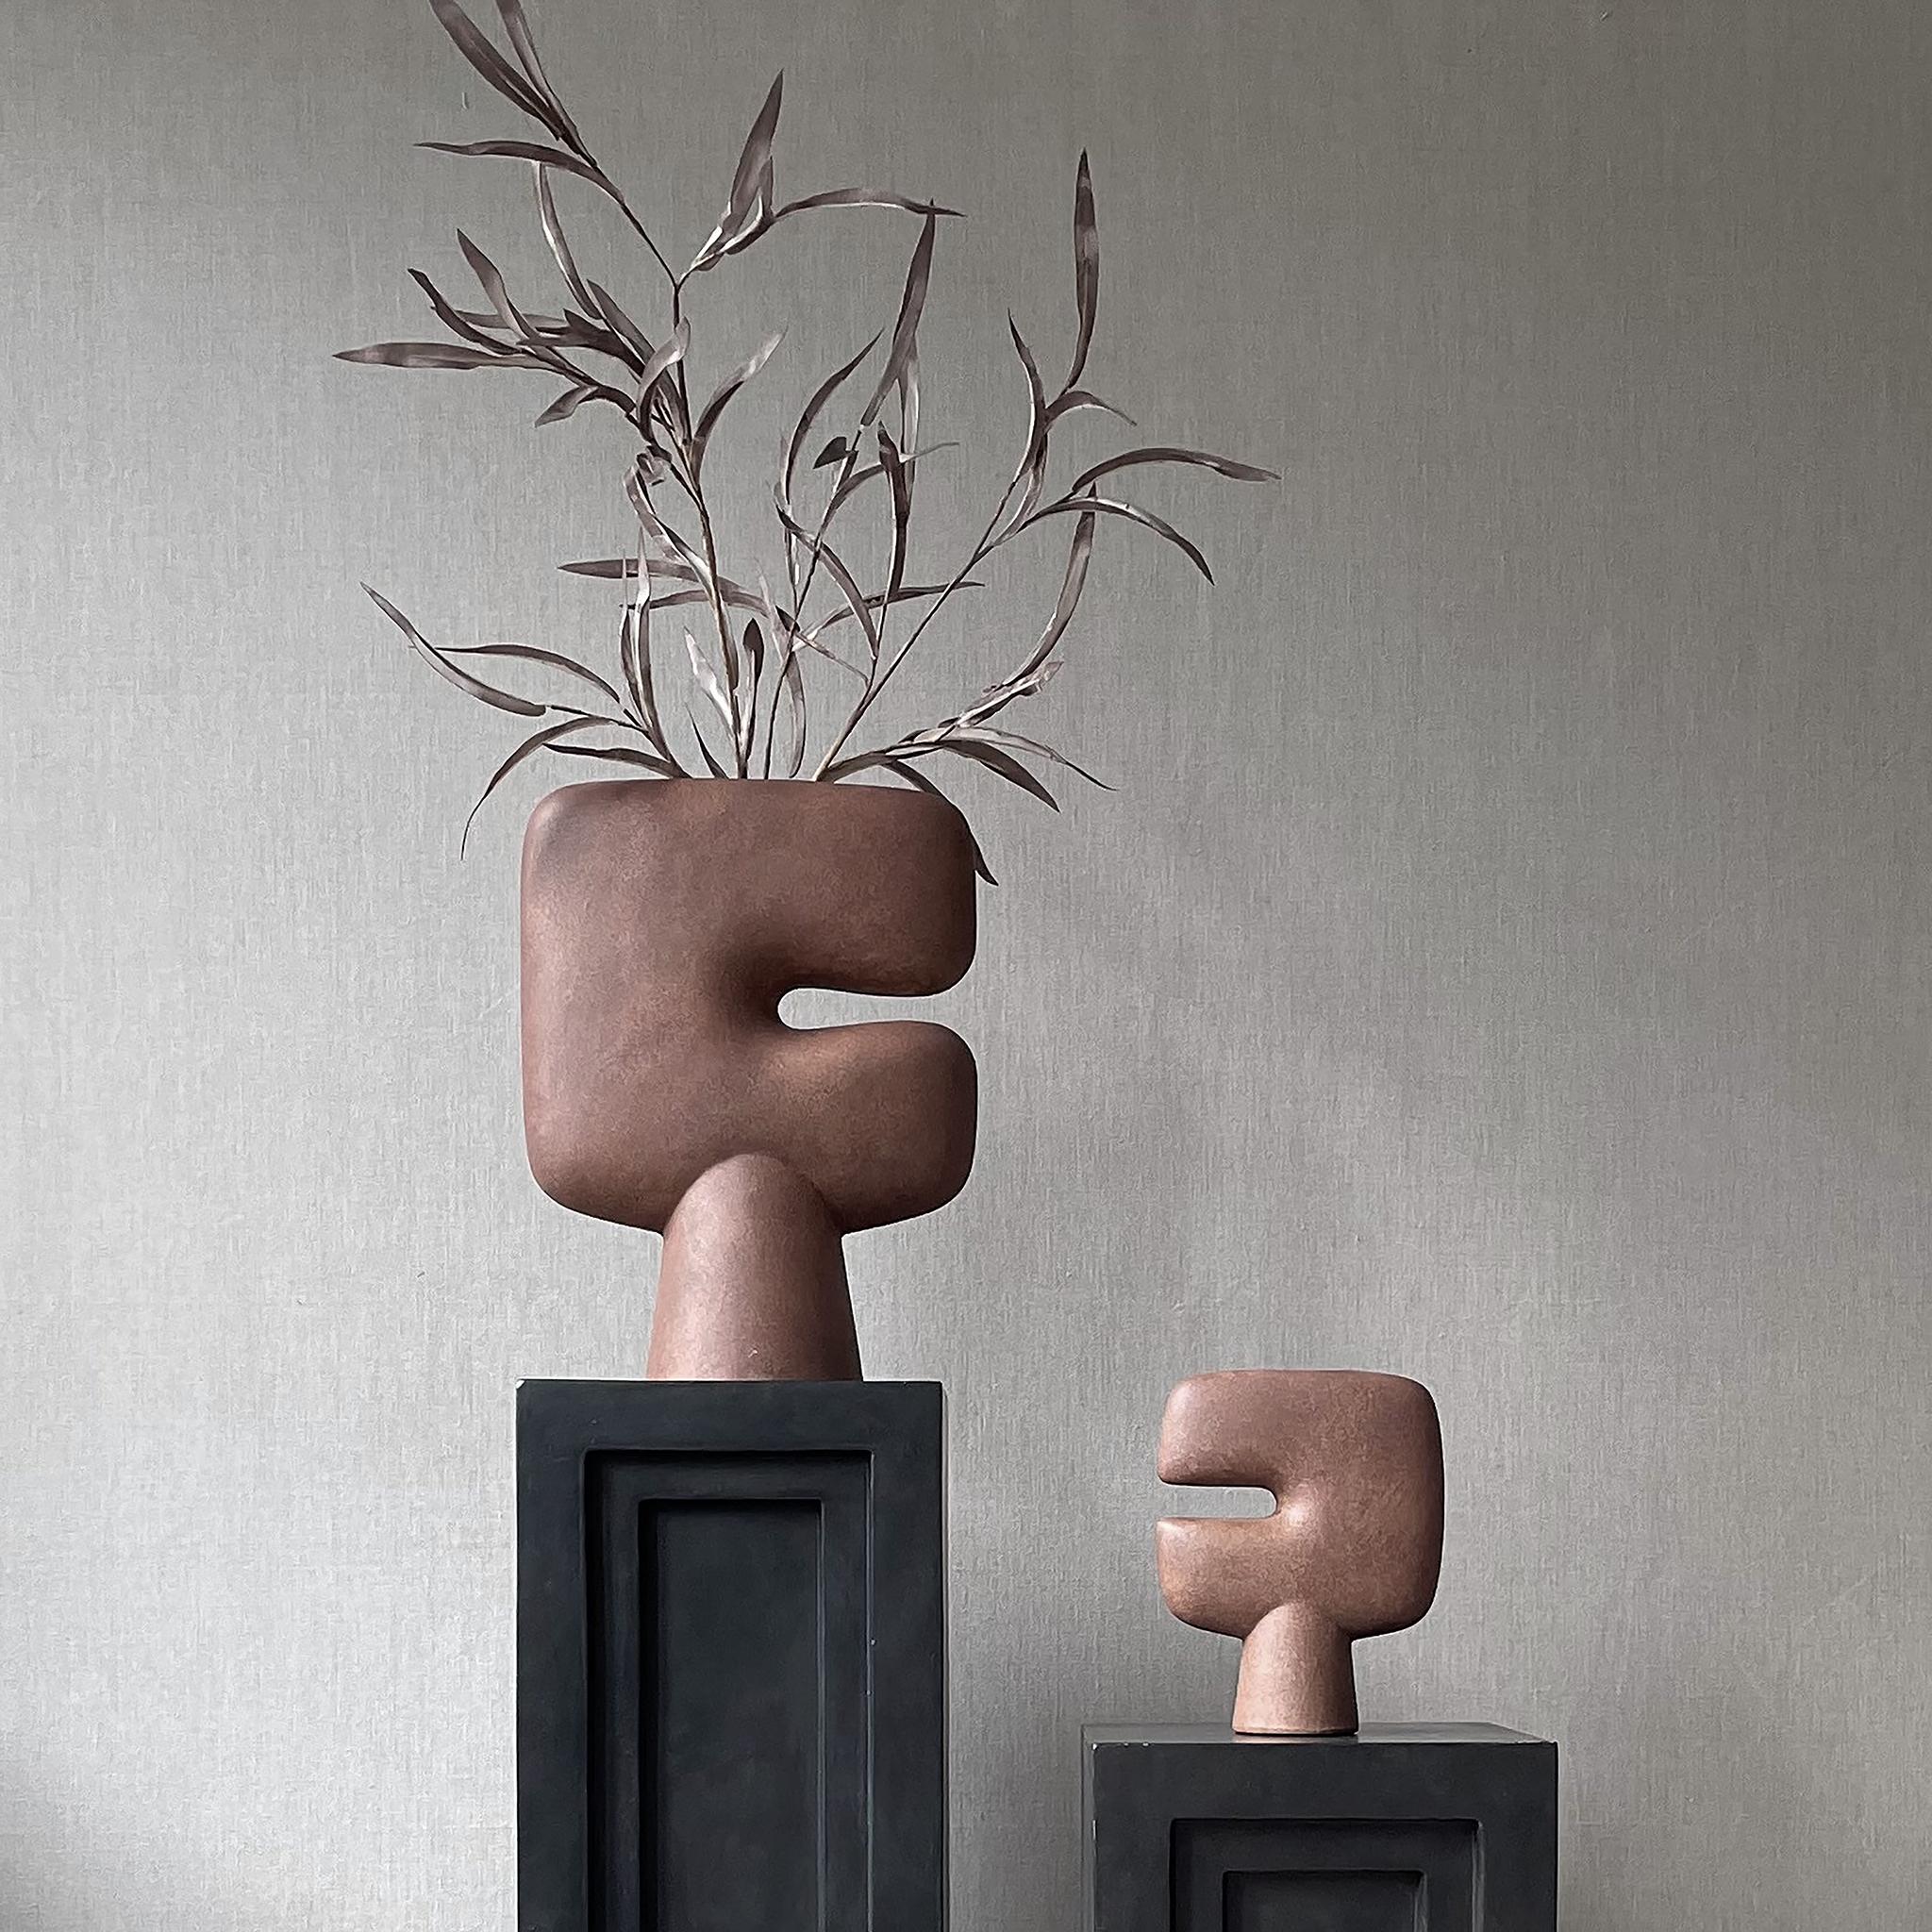 A Set of 2 terracotta tribal vase medio by 101 Copenhagen
Designed by Kristian Sofus Hansen & Tommy Hyldahl
Dimensions: L24 / W10 / H30 CM
Materials: Ceramic

The Tribal collection is a series of vases designed as a sculptural take on the